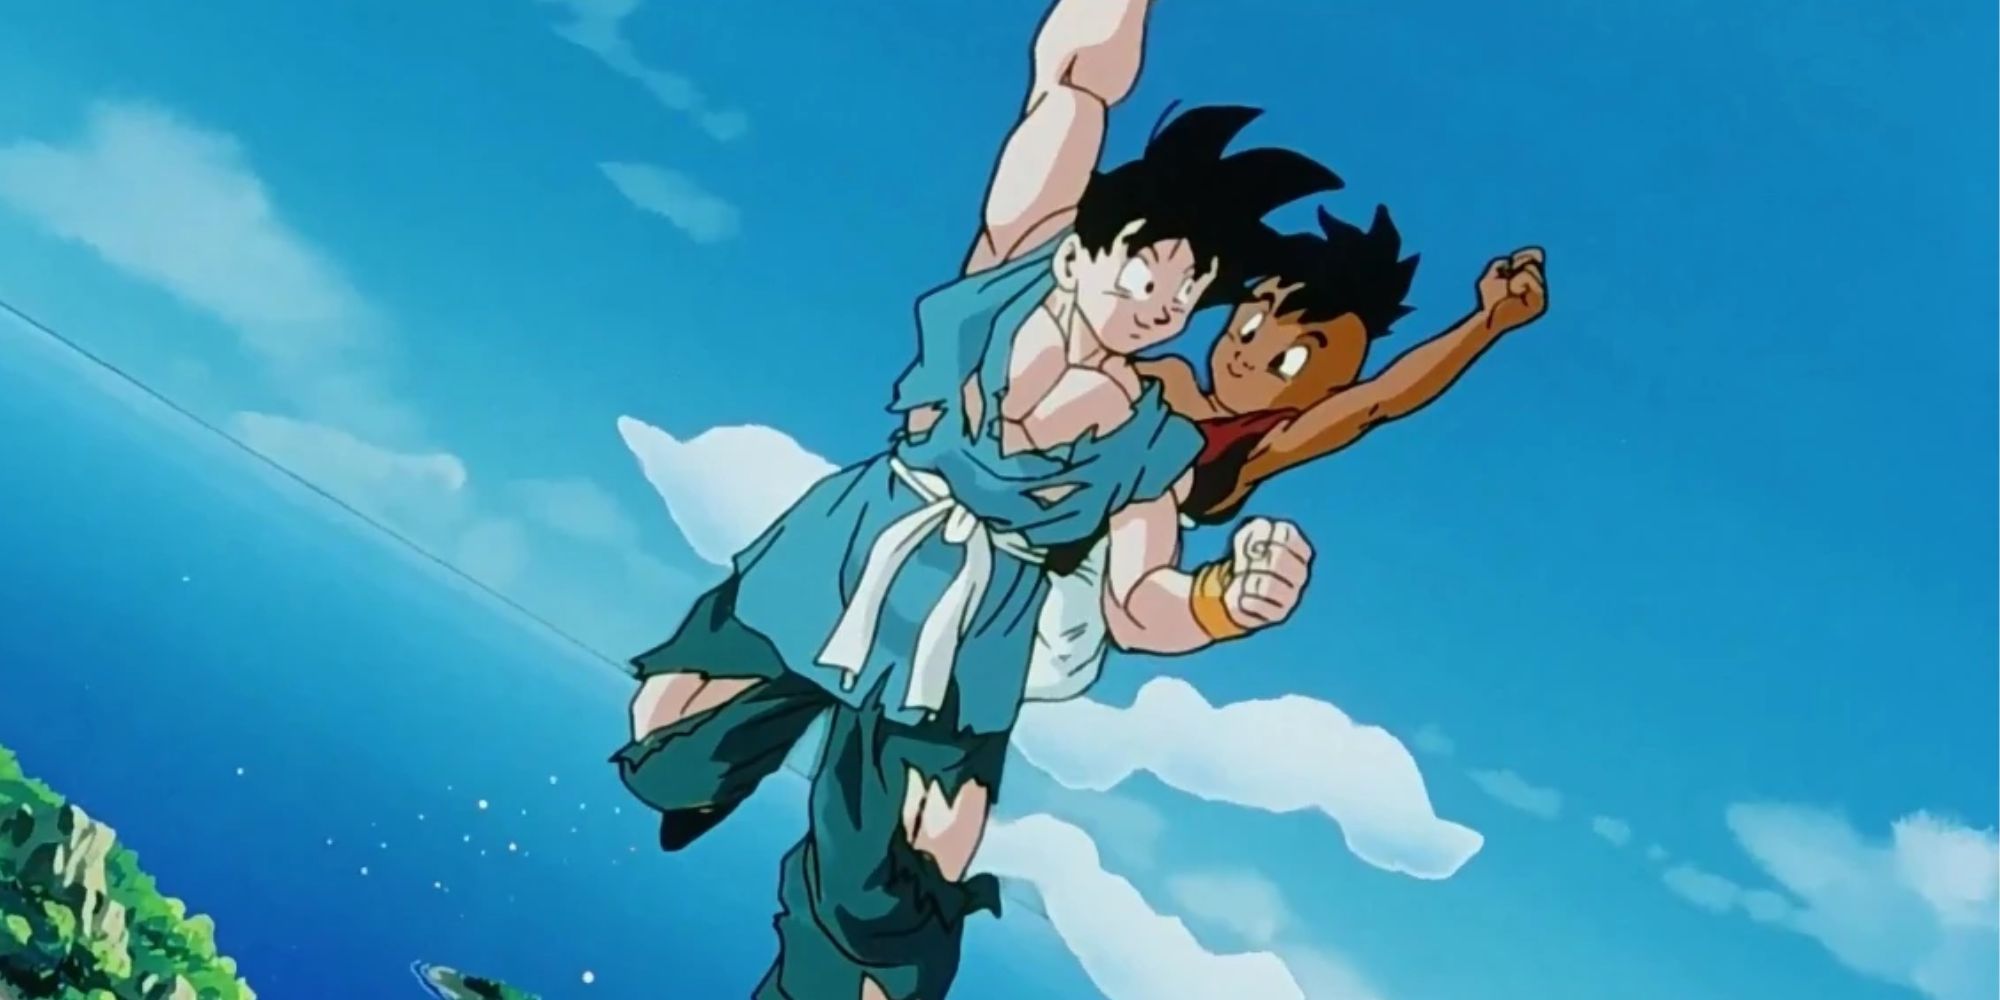 Goku and Uub from the end of Dragon Ball Z.